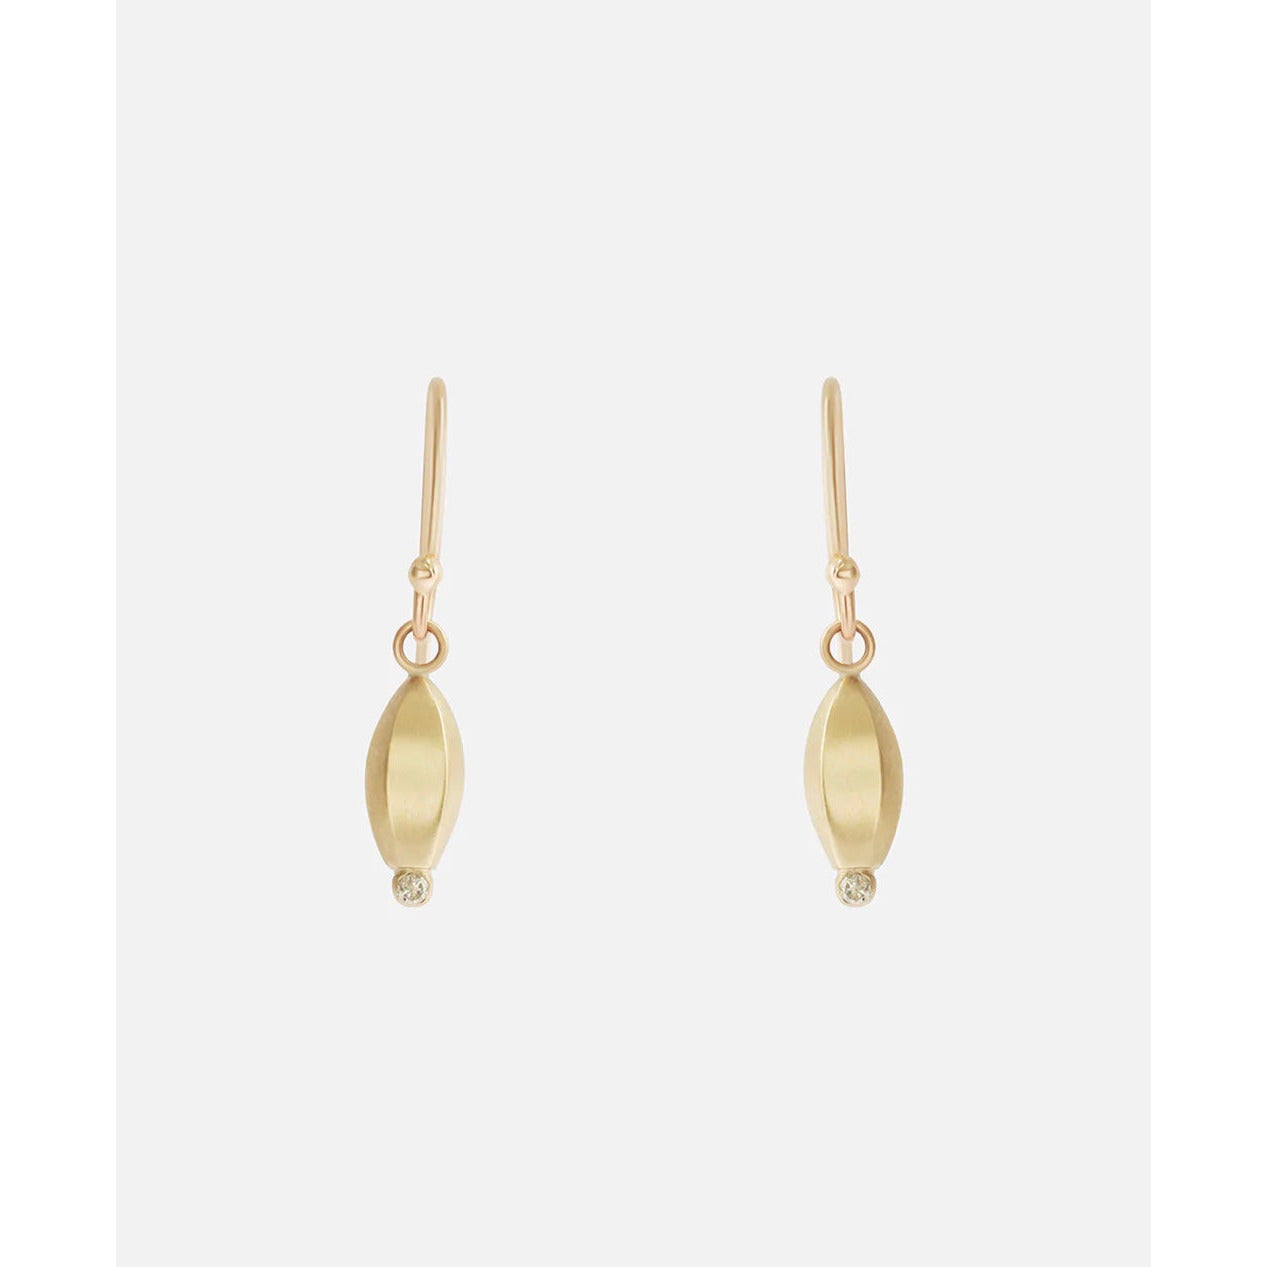 Introducing our versatile and durable LANTERN   DROP earrings, a unique accessory that effortlessly elevates any outfit. Add a touch of elegance and style to your look with our LANTERN earrings today!